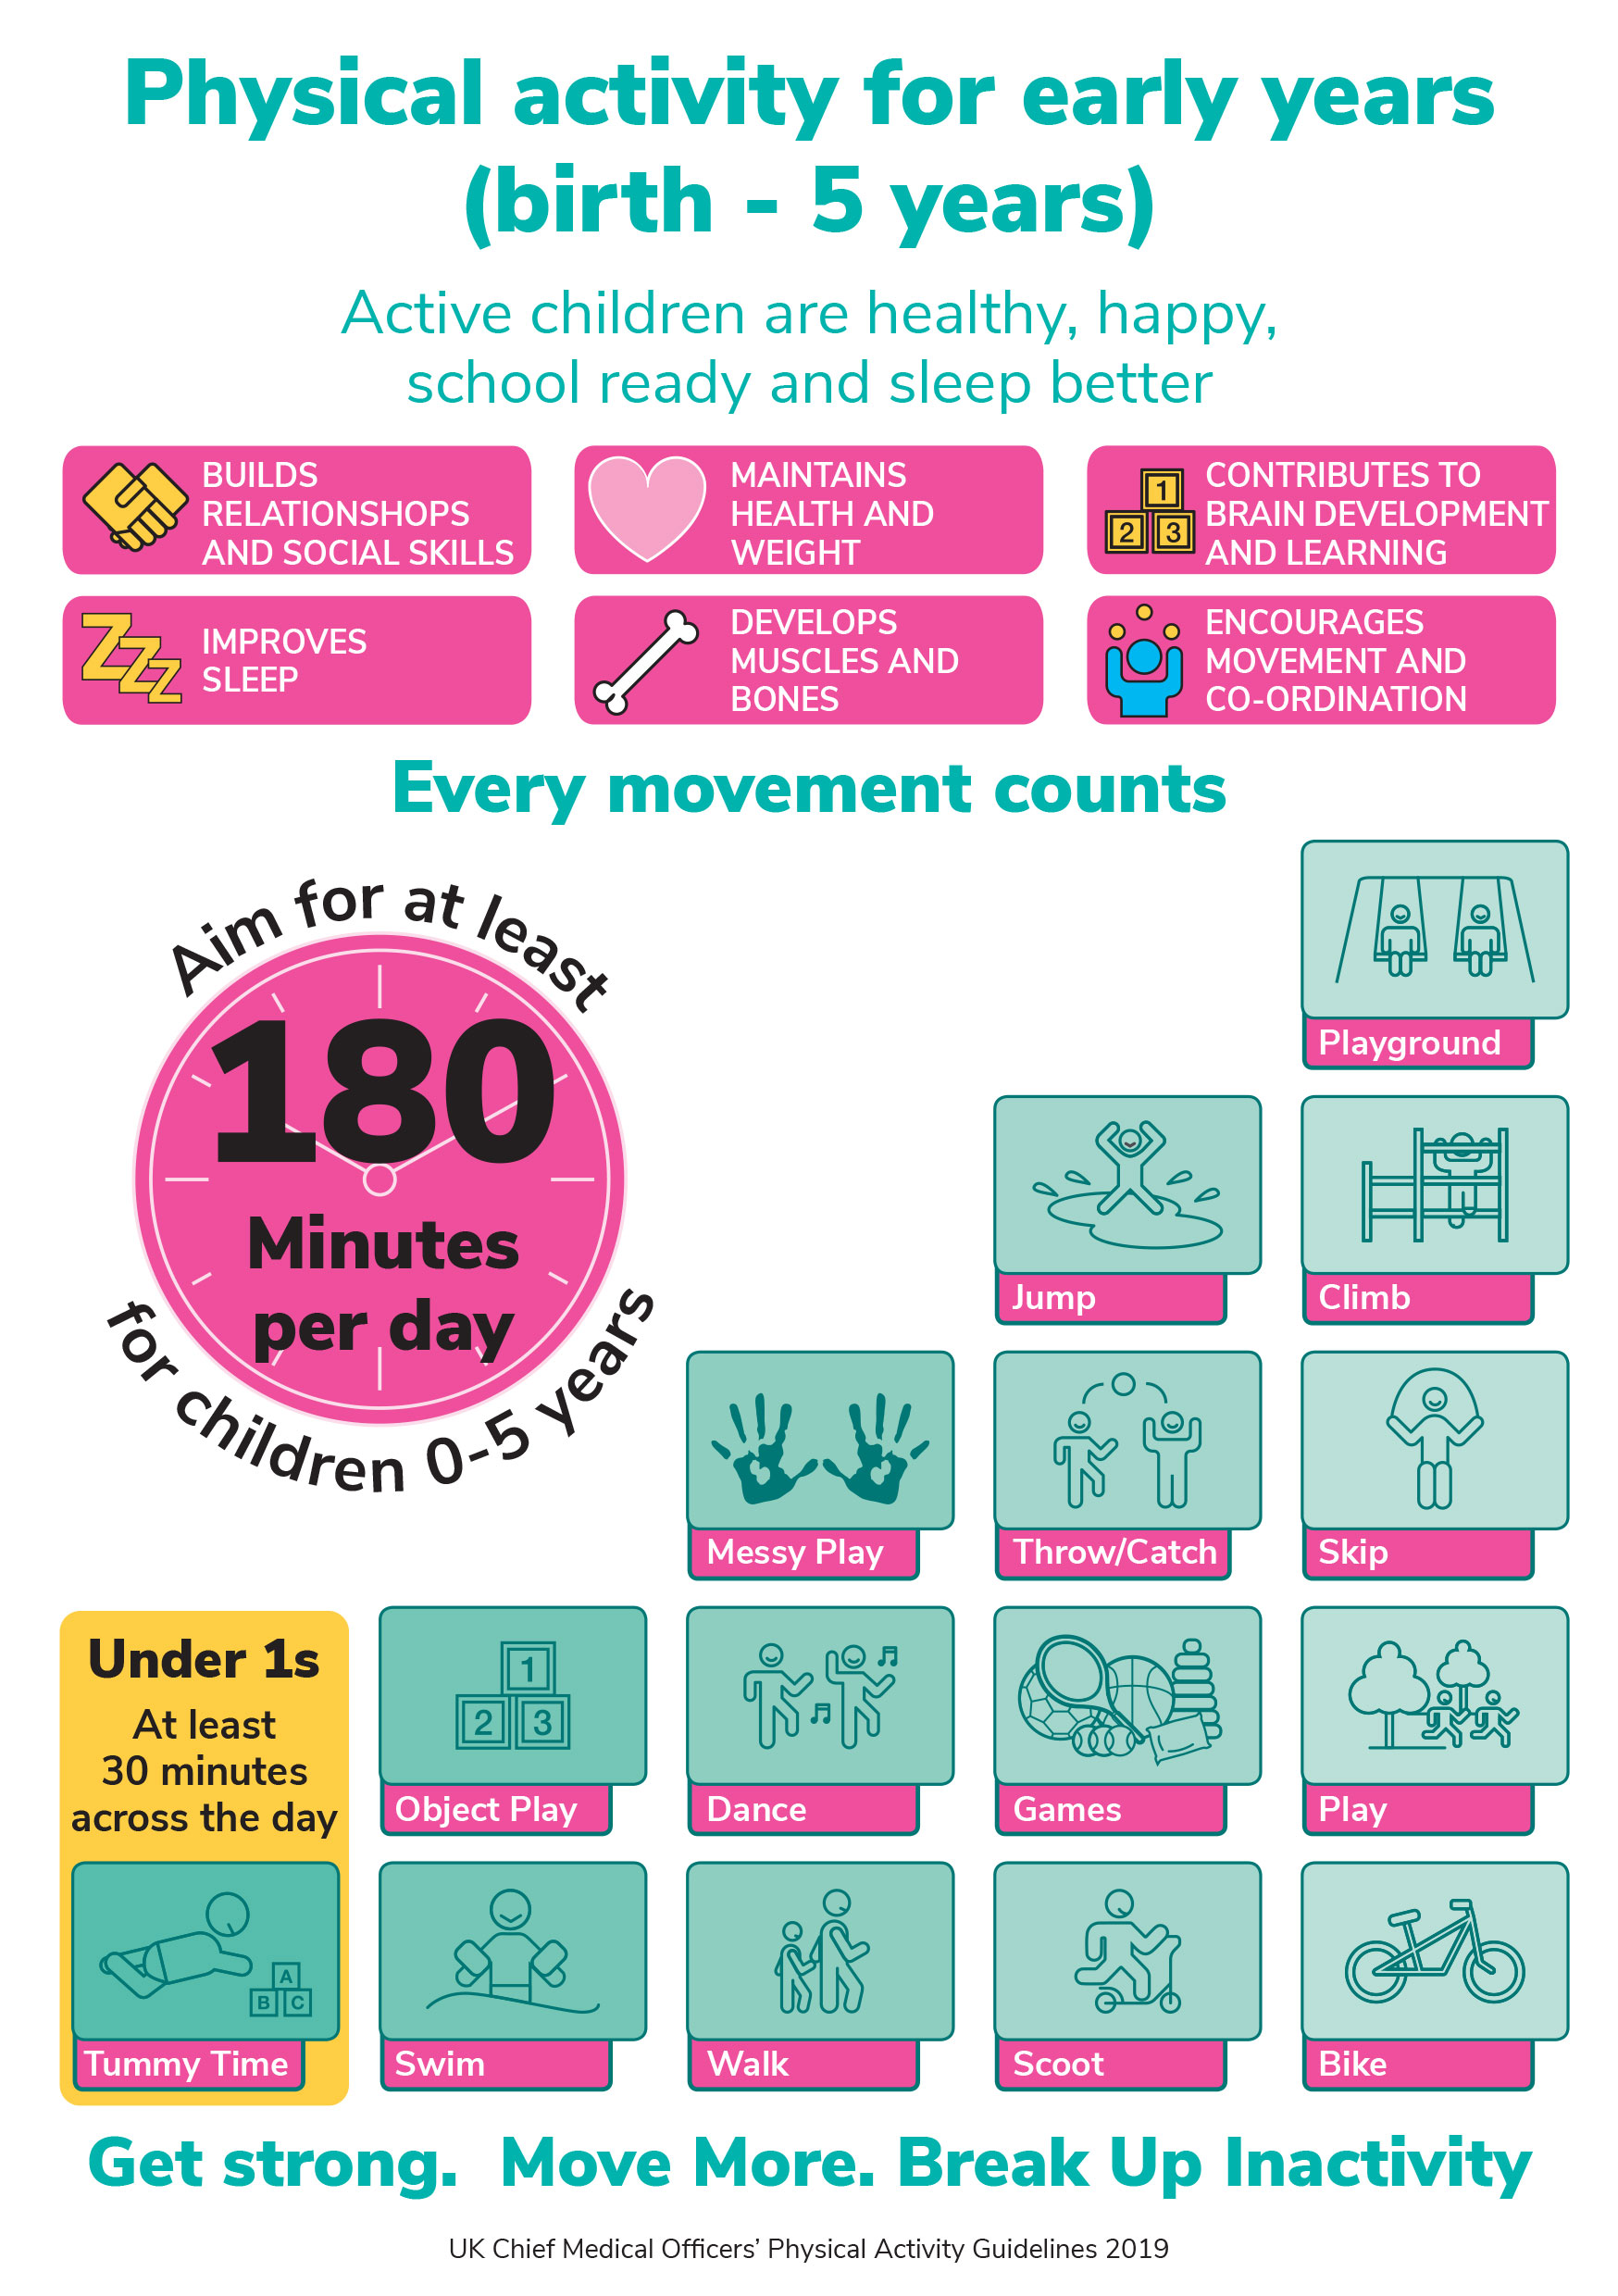 Physical activity guidelines 0-5years